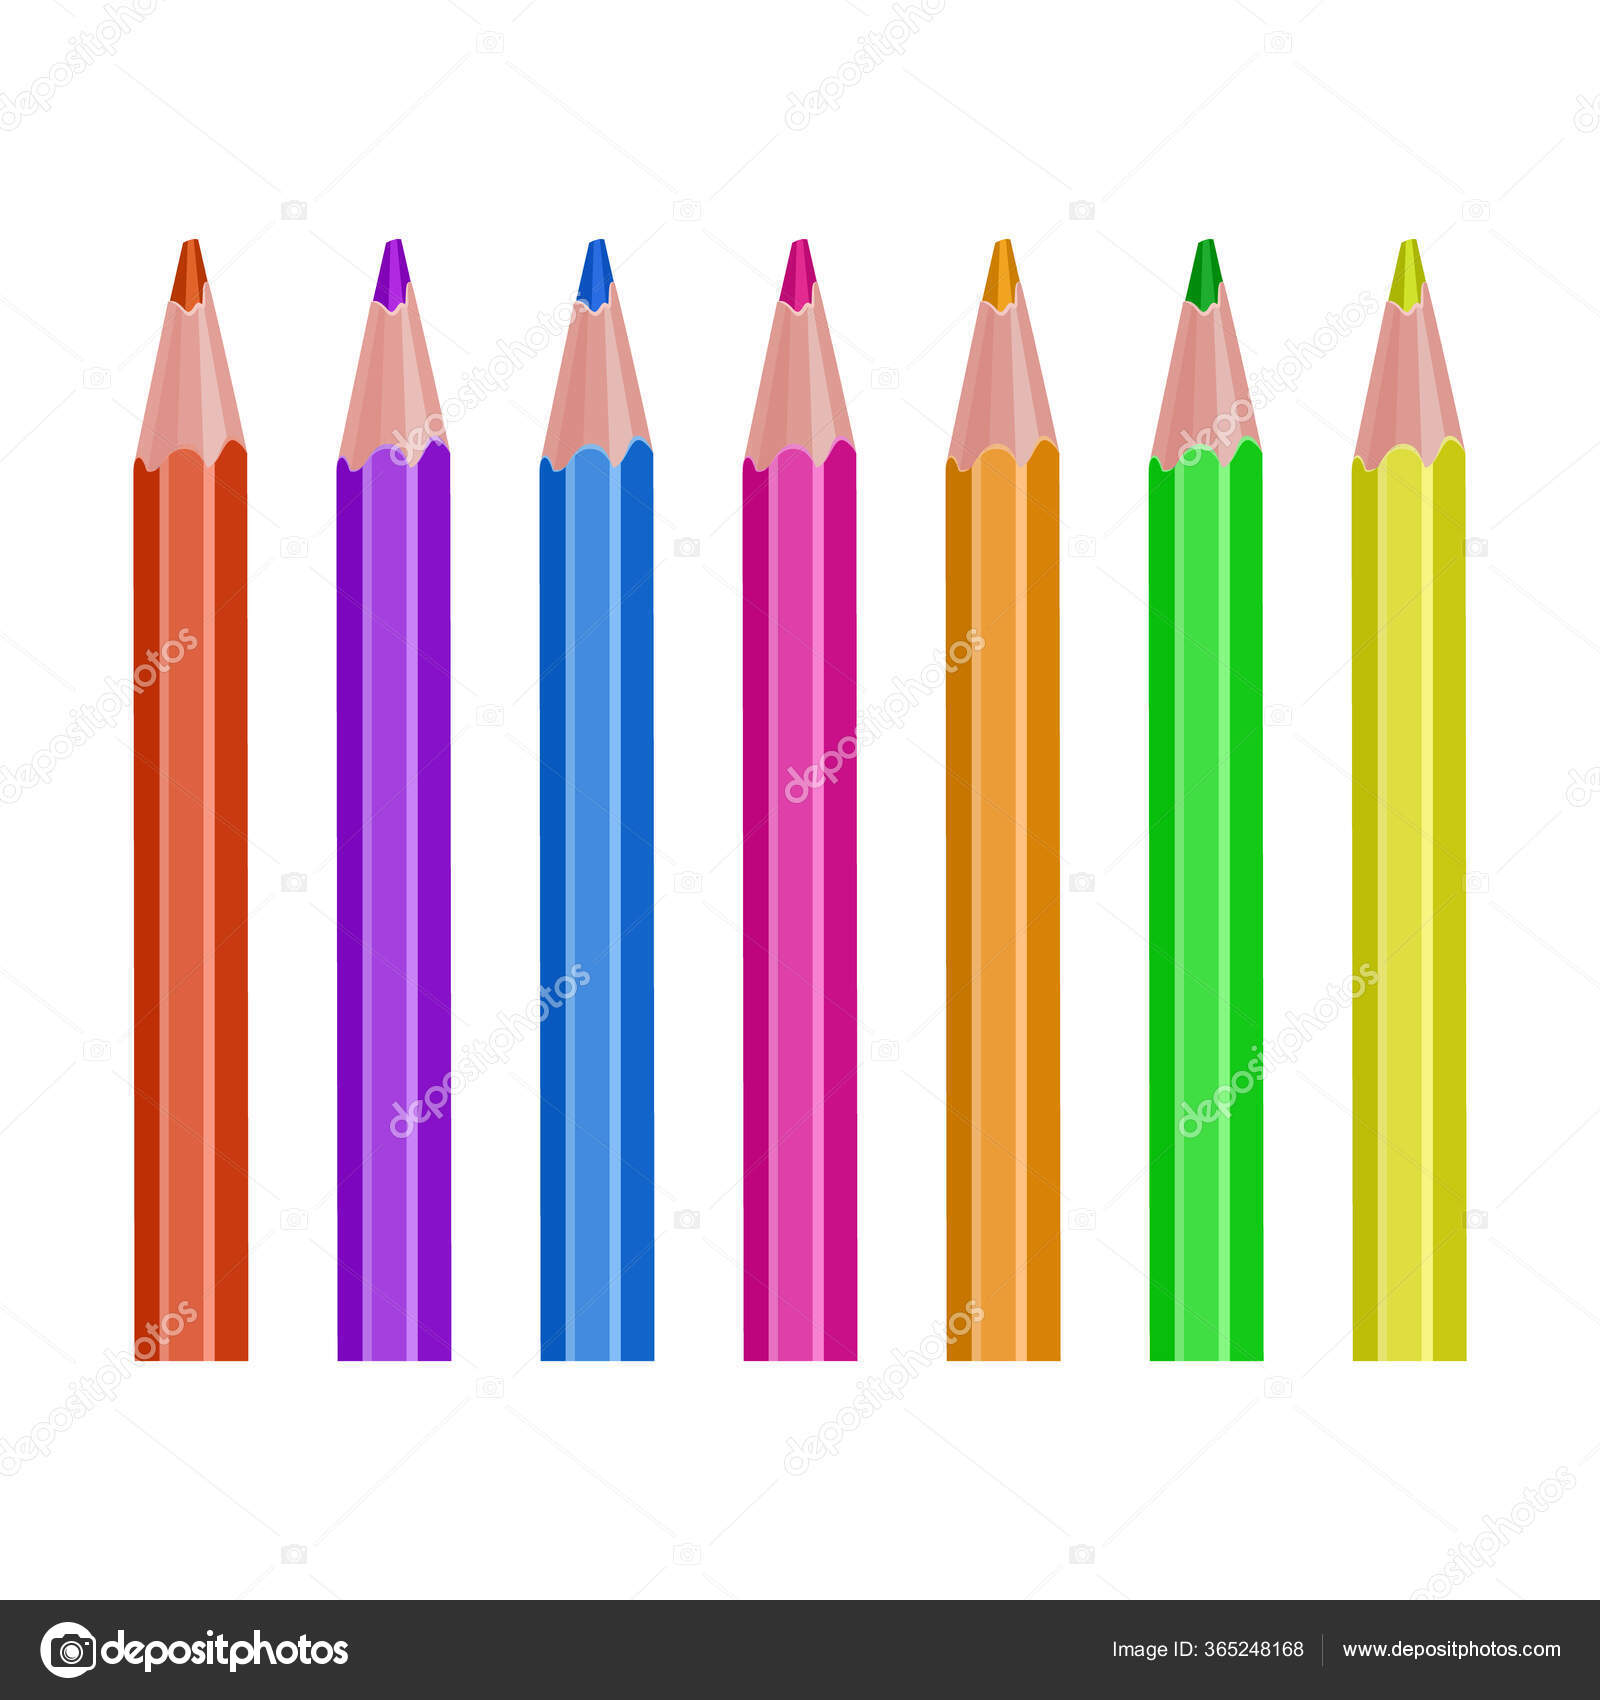 Colored pencil crayons in a row on white background Background